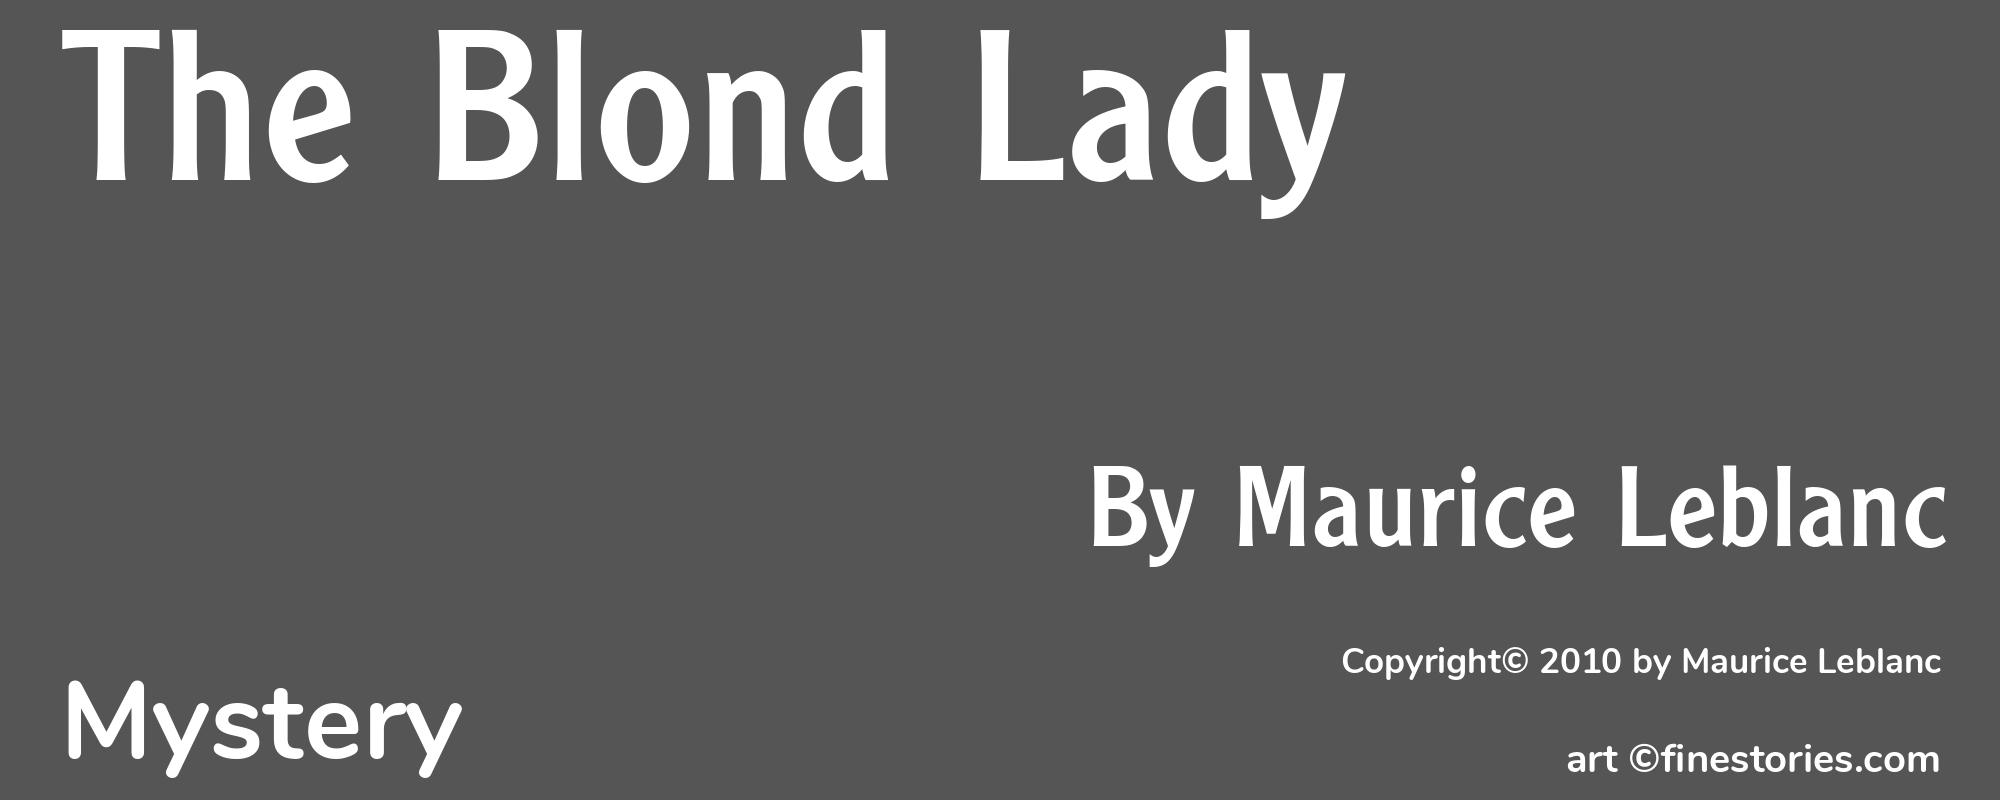 The Blond Lady - Cover